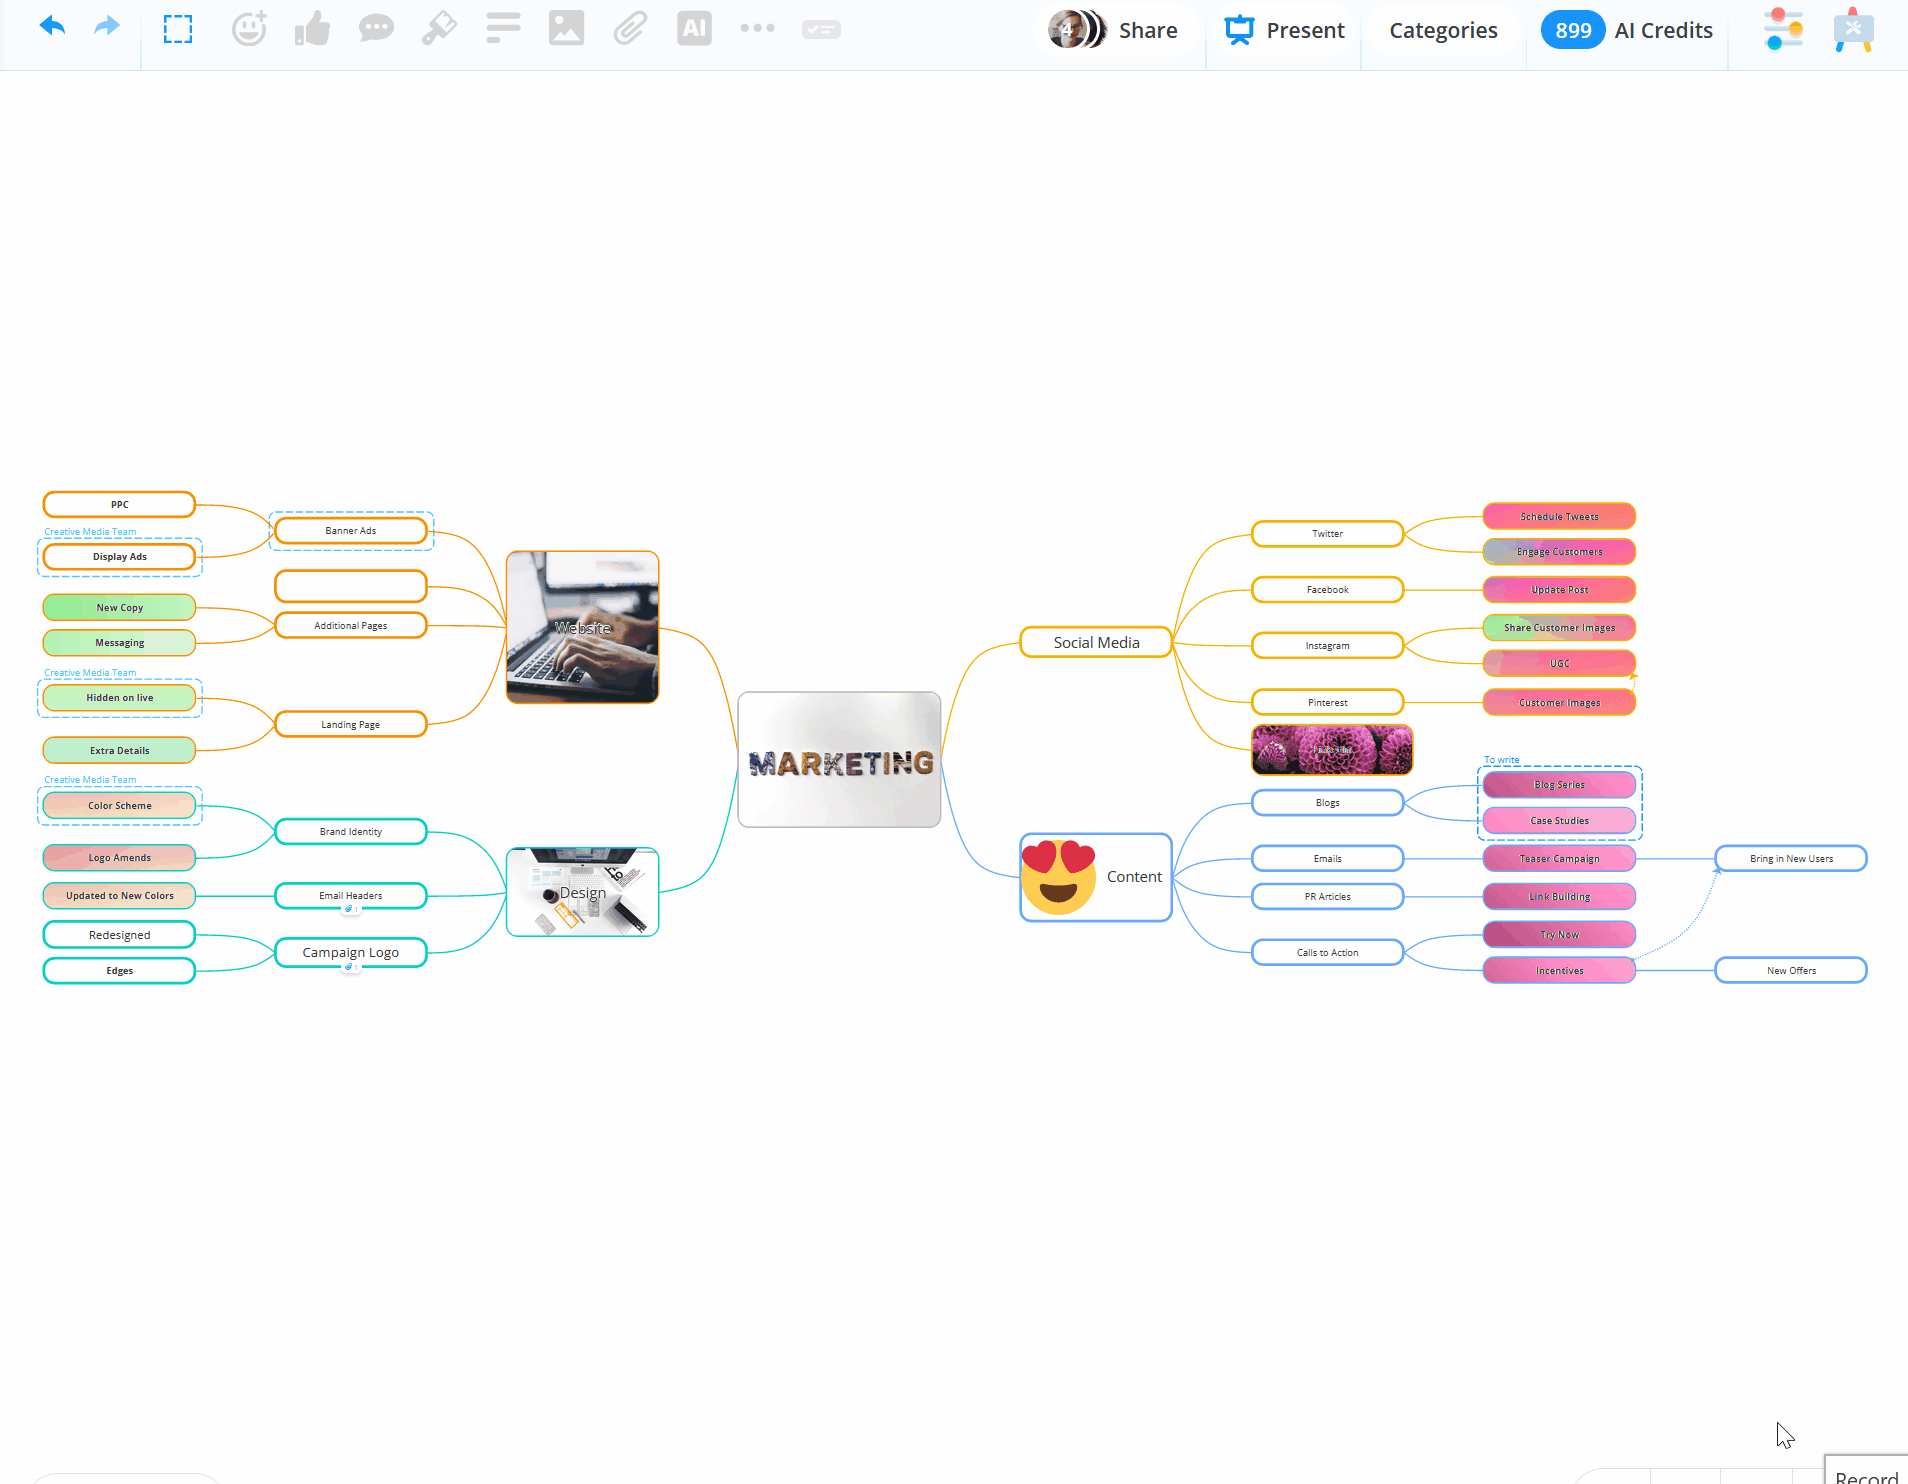 Each parent branch will transform to a bubble when you switch your Ayoa mind map to a capture map